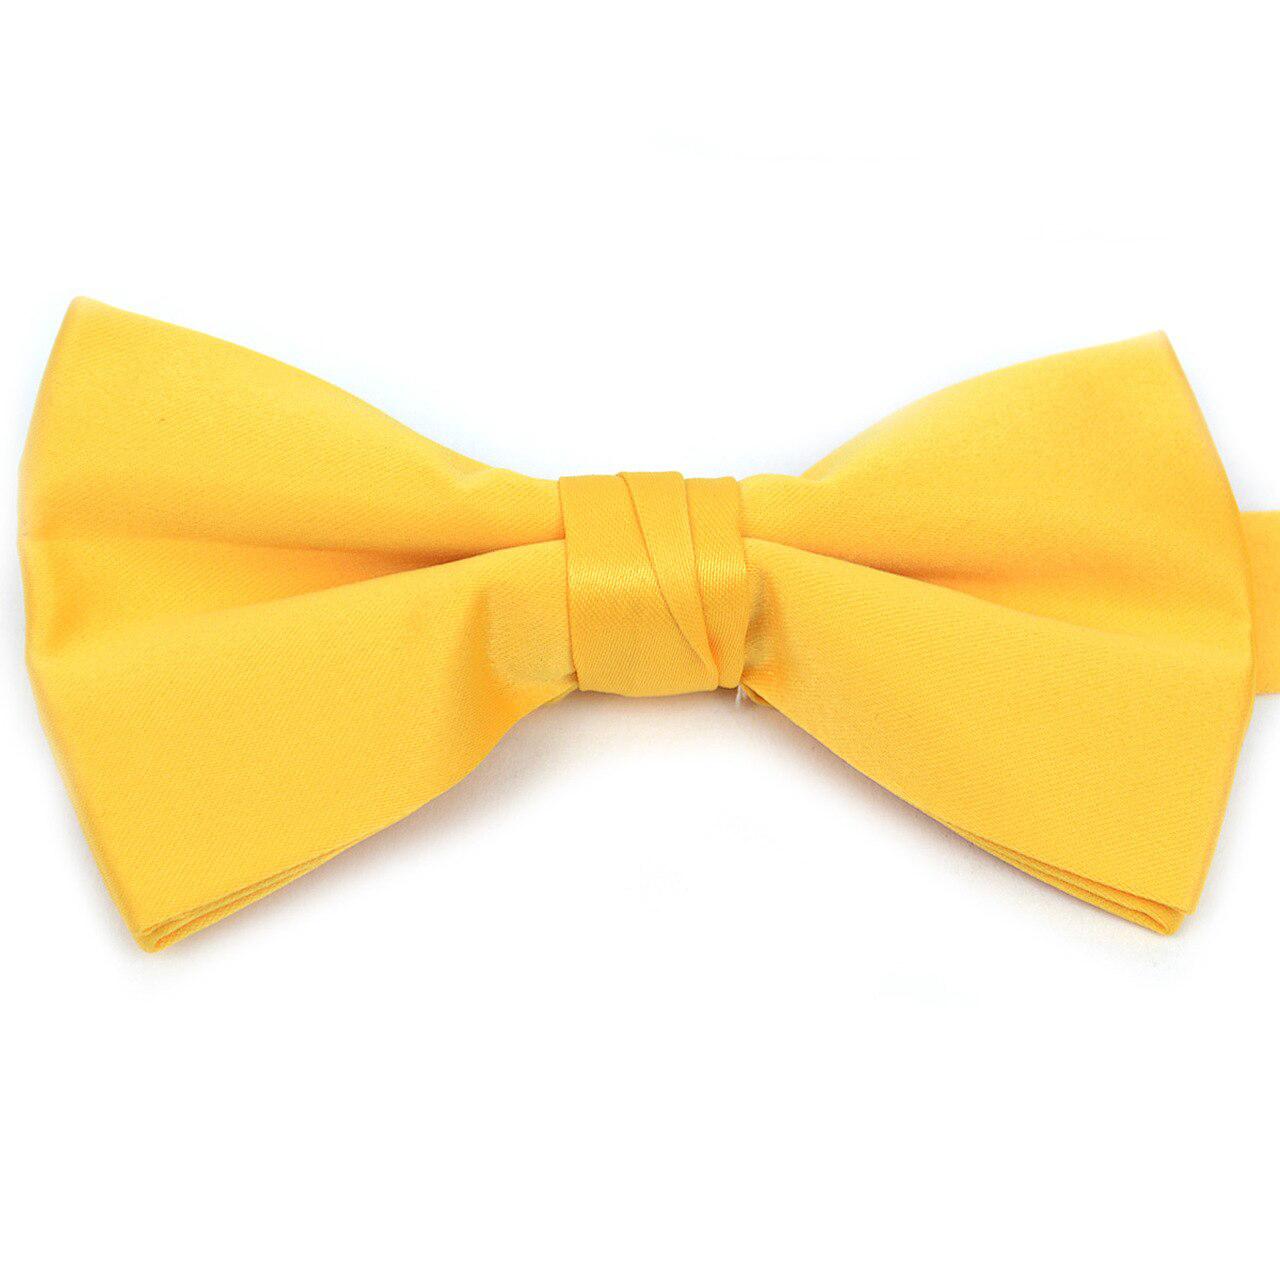  Solid Bow Tie Boxed - Yellow